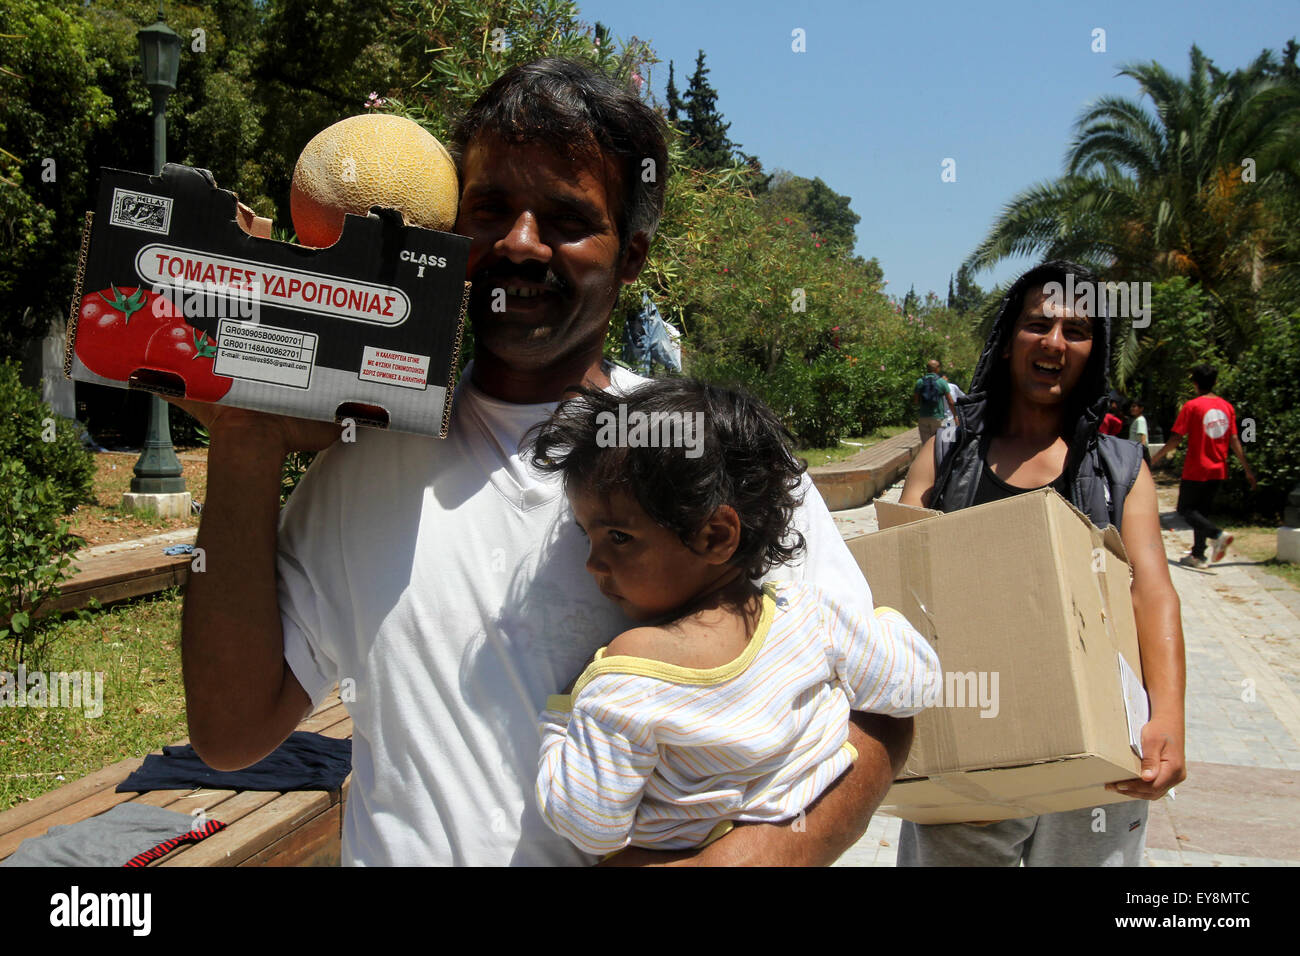 Athens, Greece. 24th July, 2015. Afghan refugees carry food back to their tent at a makeshift camp in a public park of Athens, Greece, July 24, 2015. Debt-stricken Greece struggles hard to cope with sharp rise in arrival of mainly Syrian and Afghan refugees fleeing war. It becomes increasingly difficult to provide them with proper housing facilities, food and medical assistance. Credit:  Marios Lolos/Xinhua/Alamy Live News Stock Photo